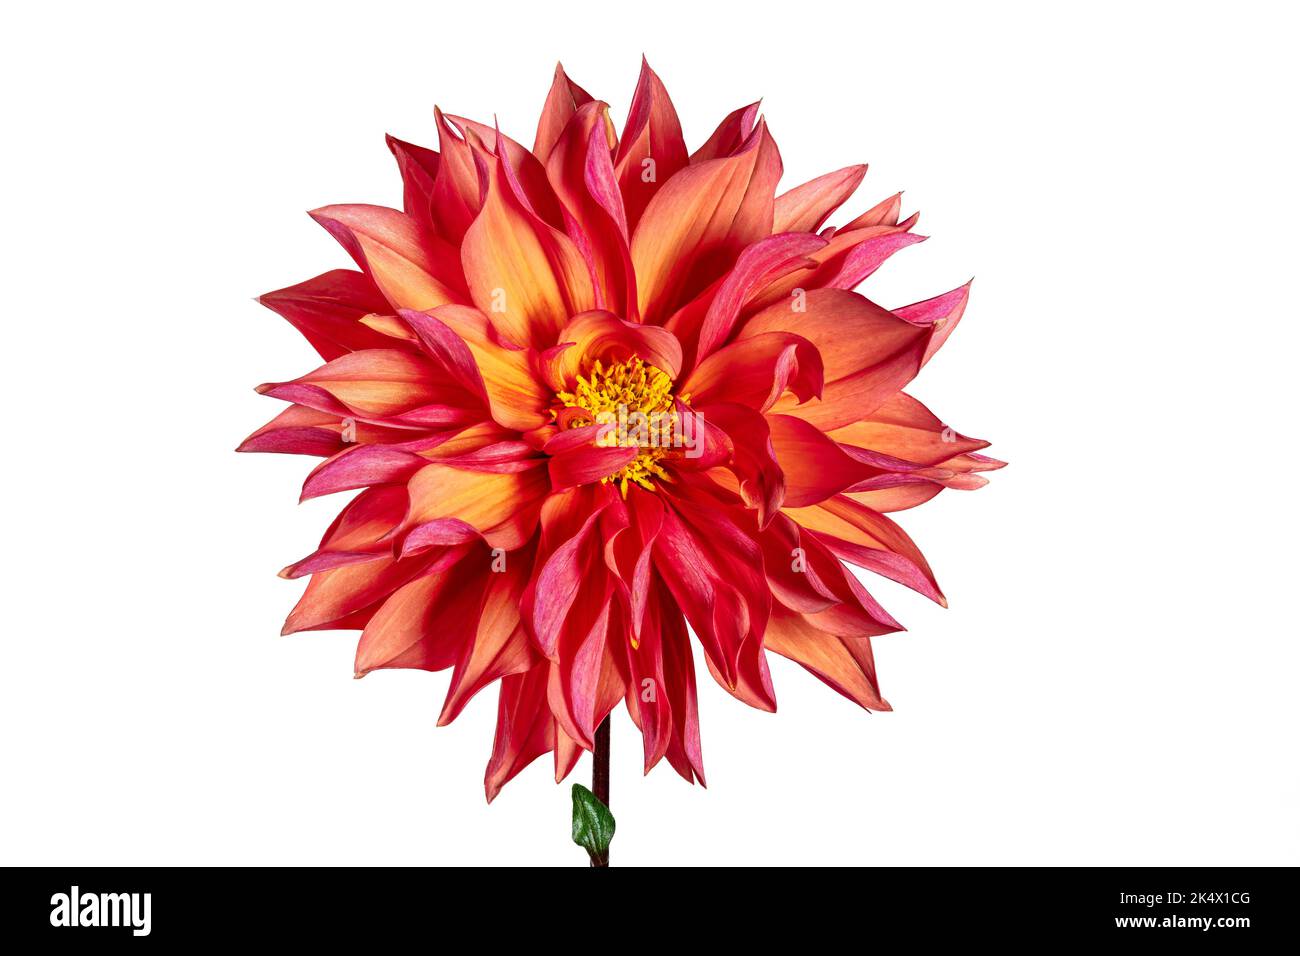 Macro of an isolated red dahlia flower blossom Stock Photo